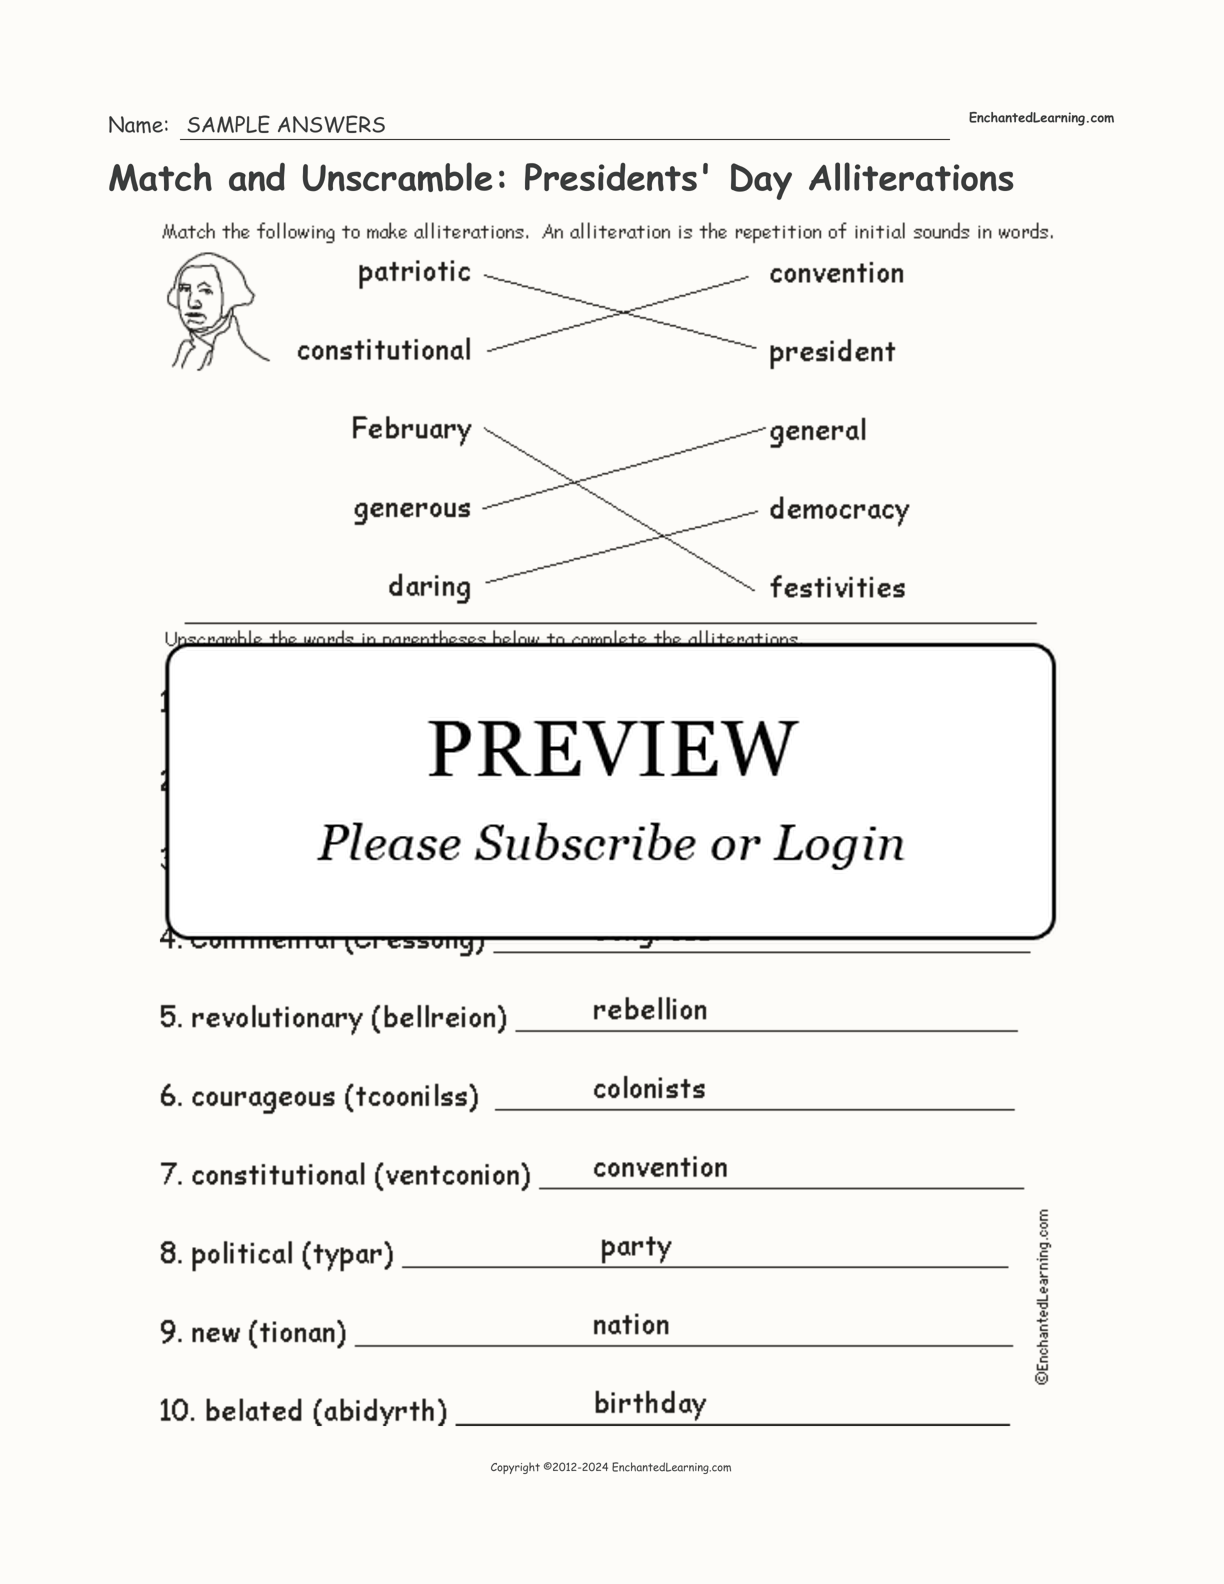 Match and Unscramble: Presidents' Day Alliterations interactive worksheet page 2